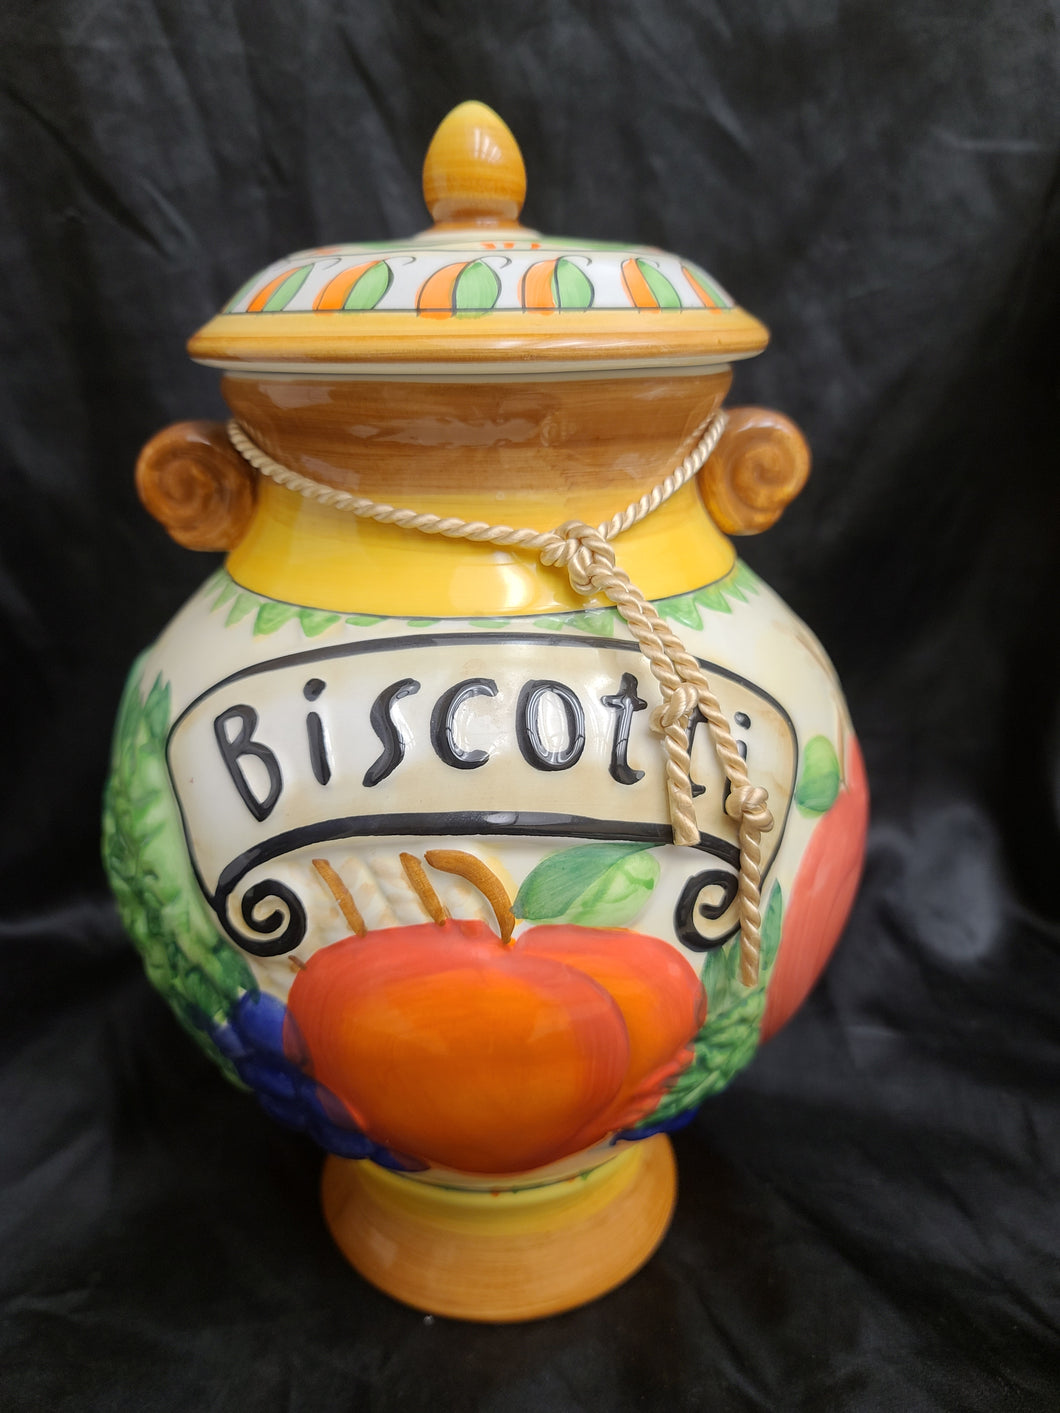 Ceramic Biscotti Jar Handmade For Nonnis Good condition, no cracks or chips Size 12